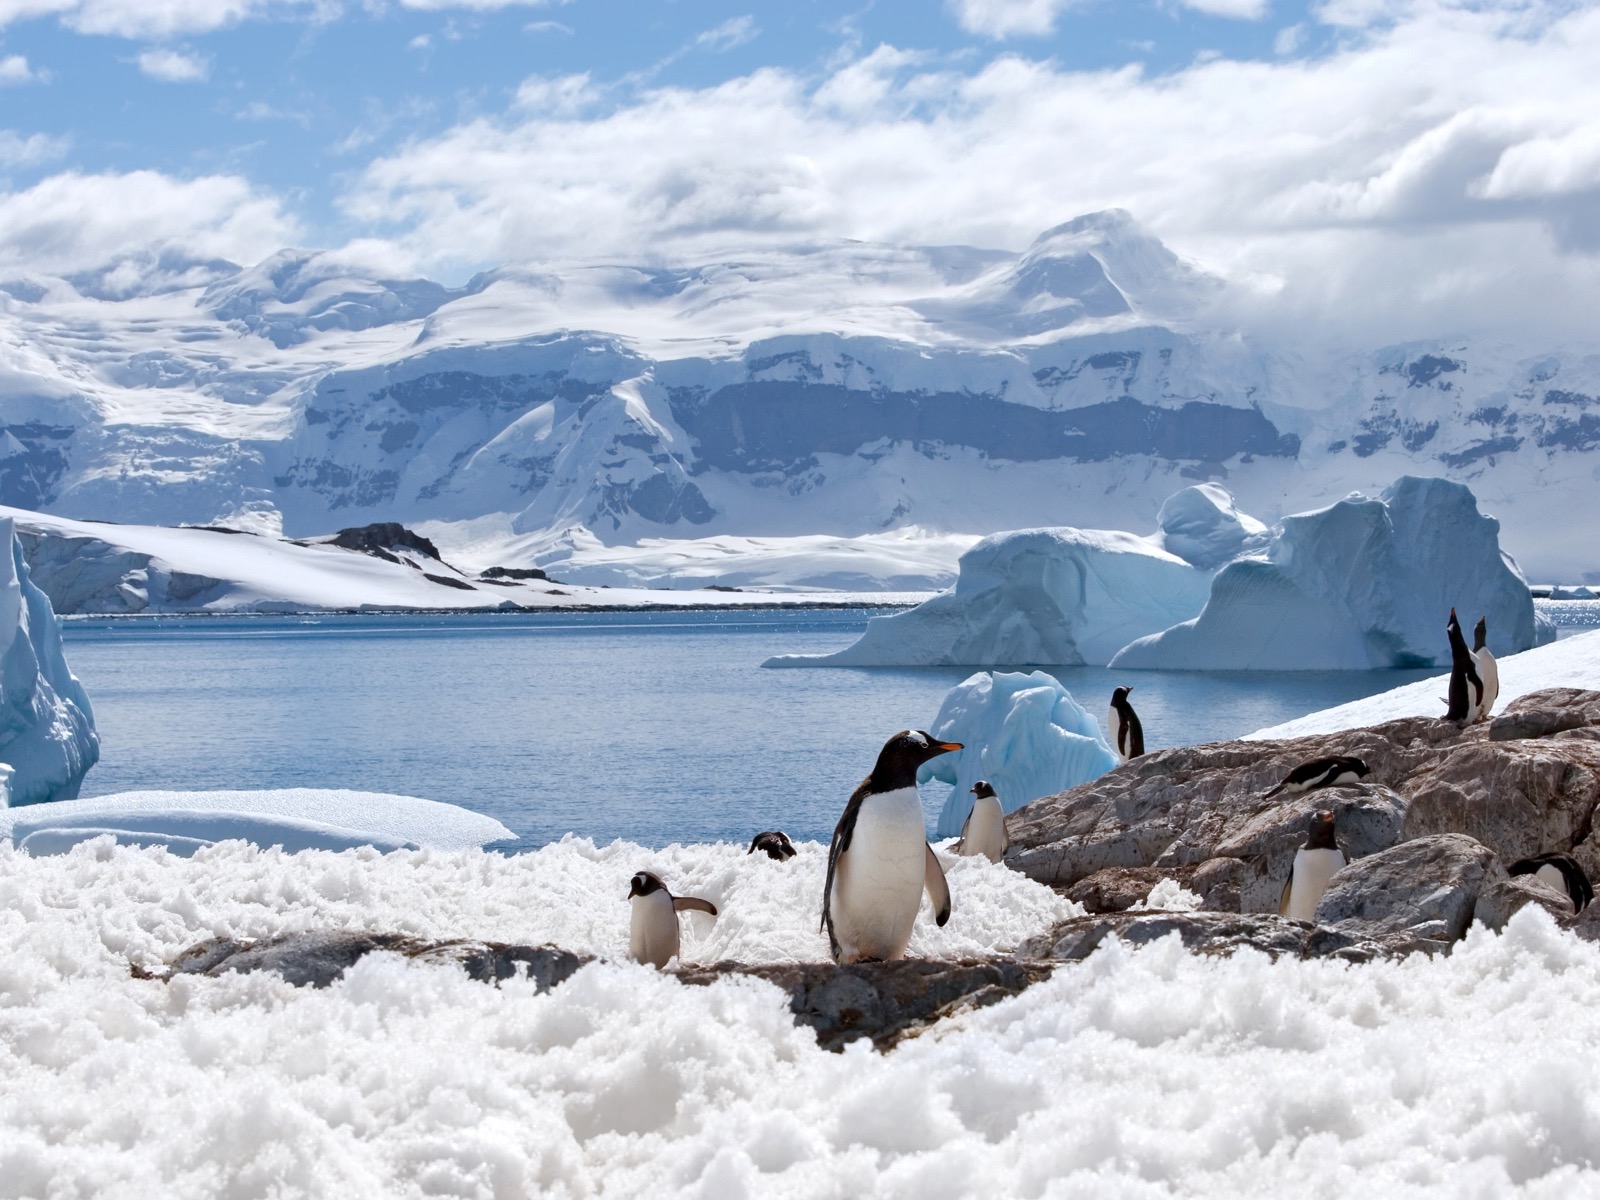 🔭 Are You Intelligent Enough to Pass This Challenging Science Quiz? Let’s Find Out Penguins in Antarctica